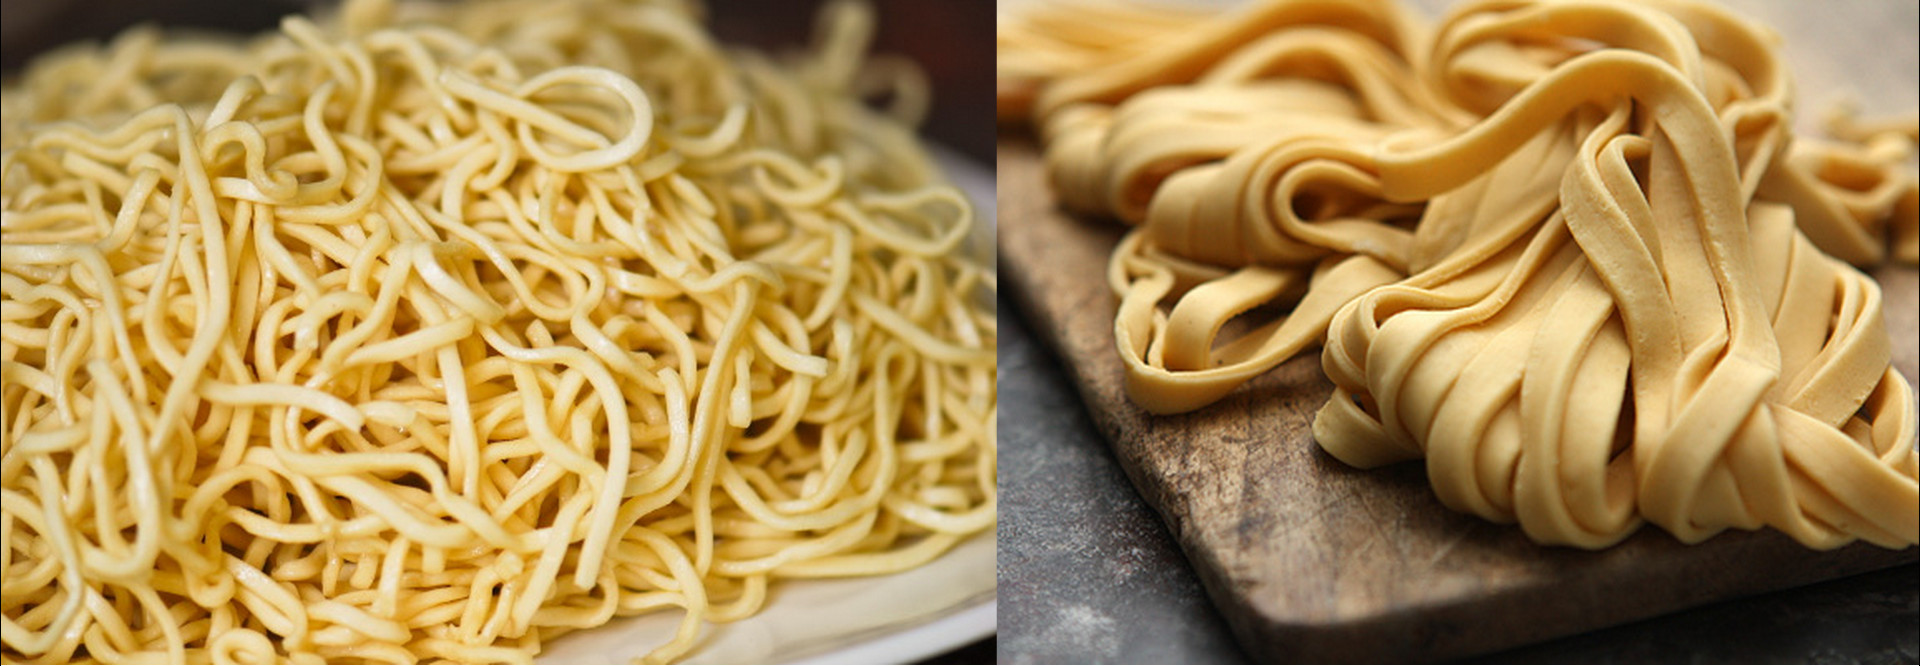 Pasta Vs Noodles
 10 Asian Dishes vs 10 Western Dishes Who Does It Better